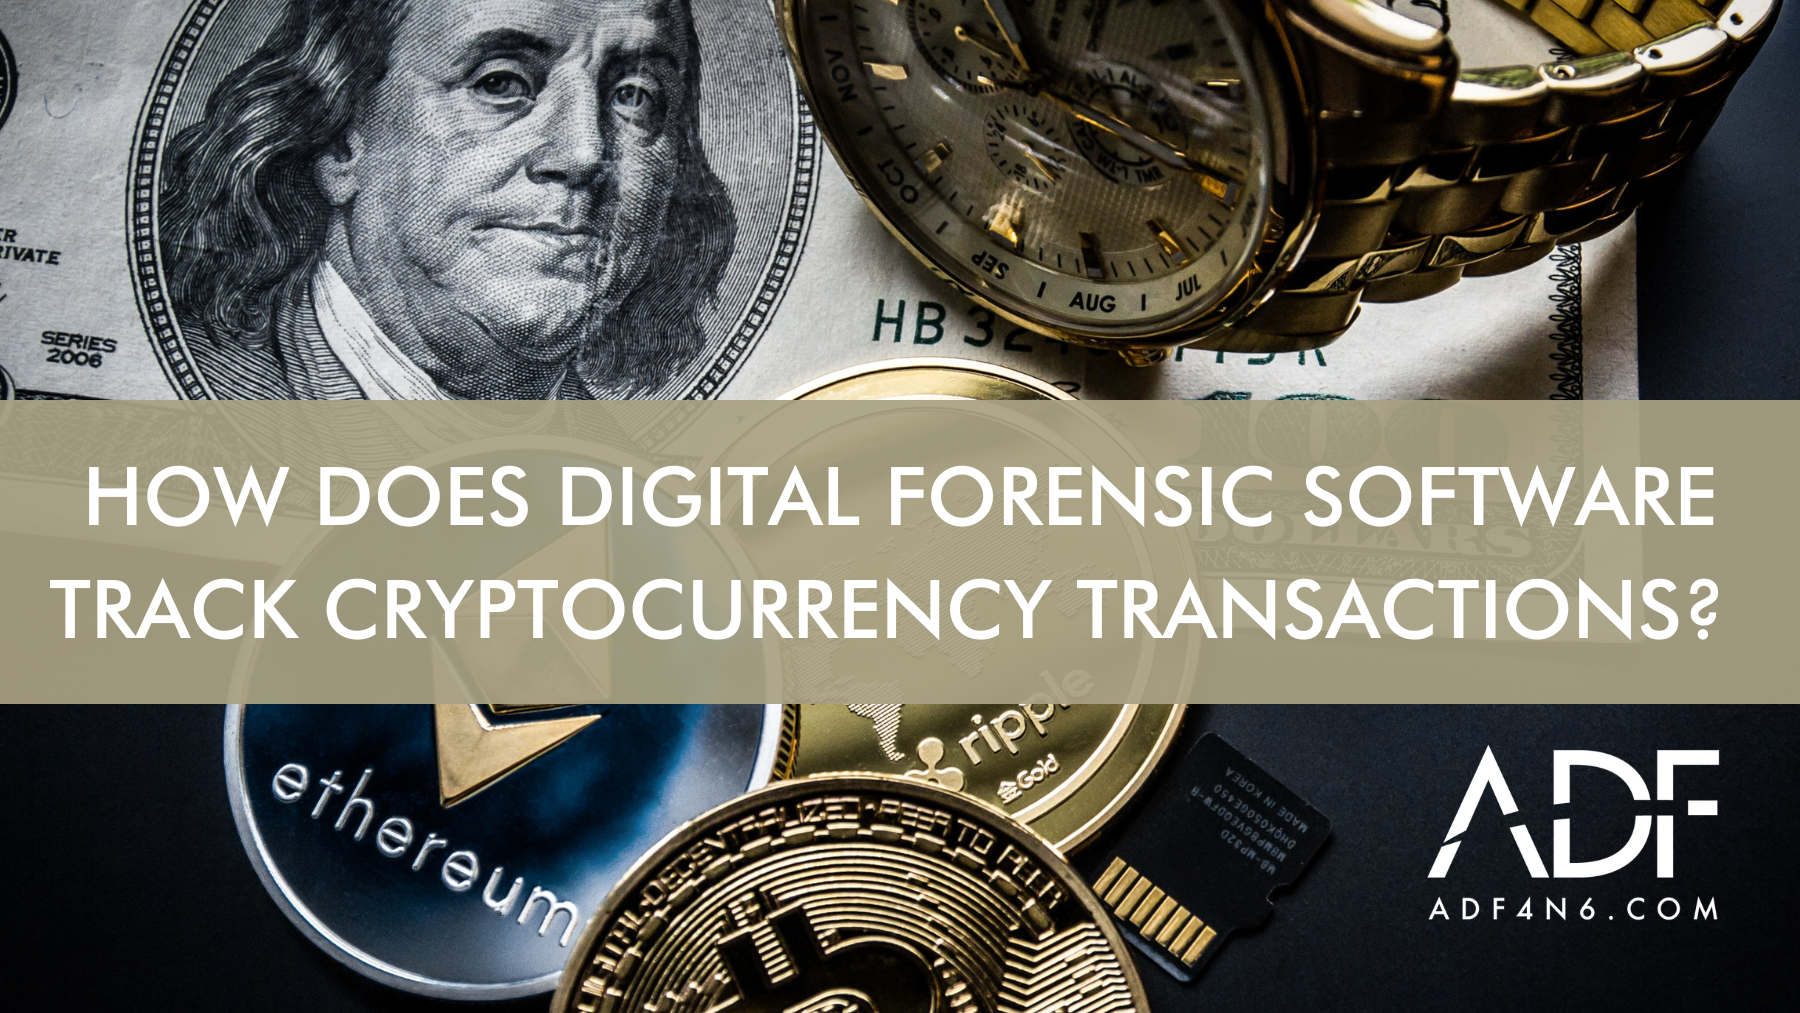 How does digital forensic software track cryptocurrency transactions?